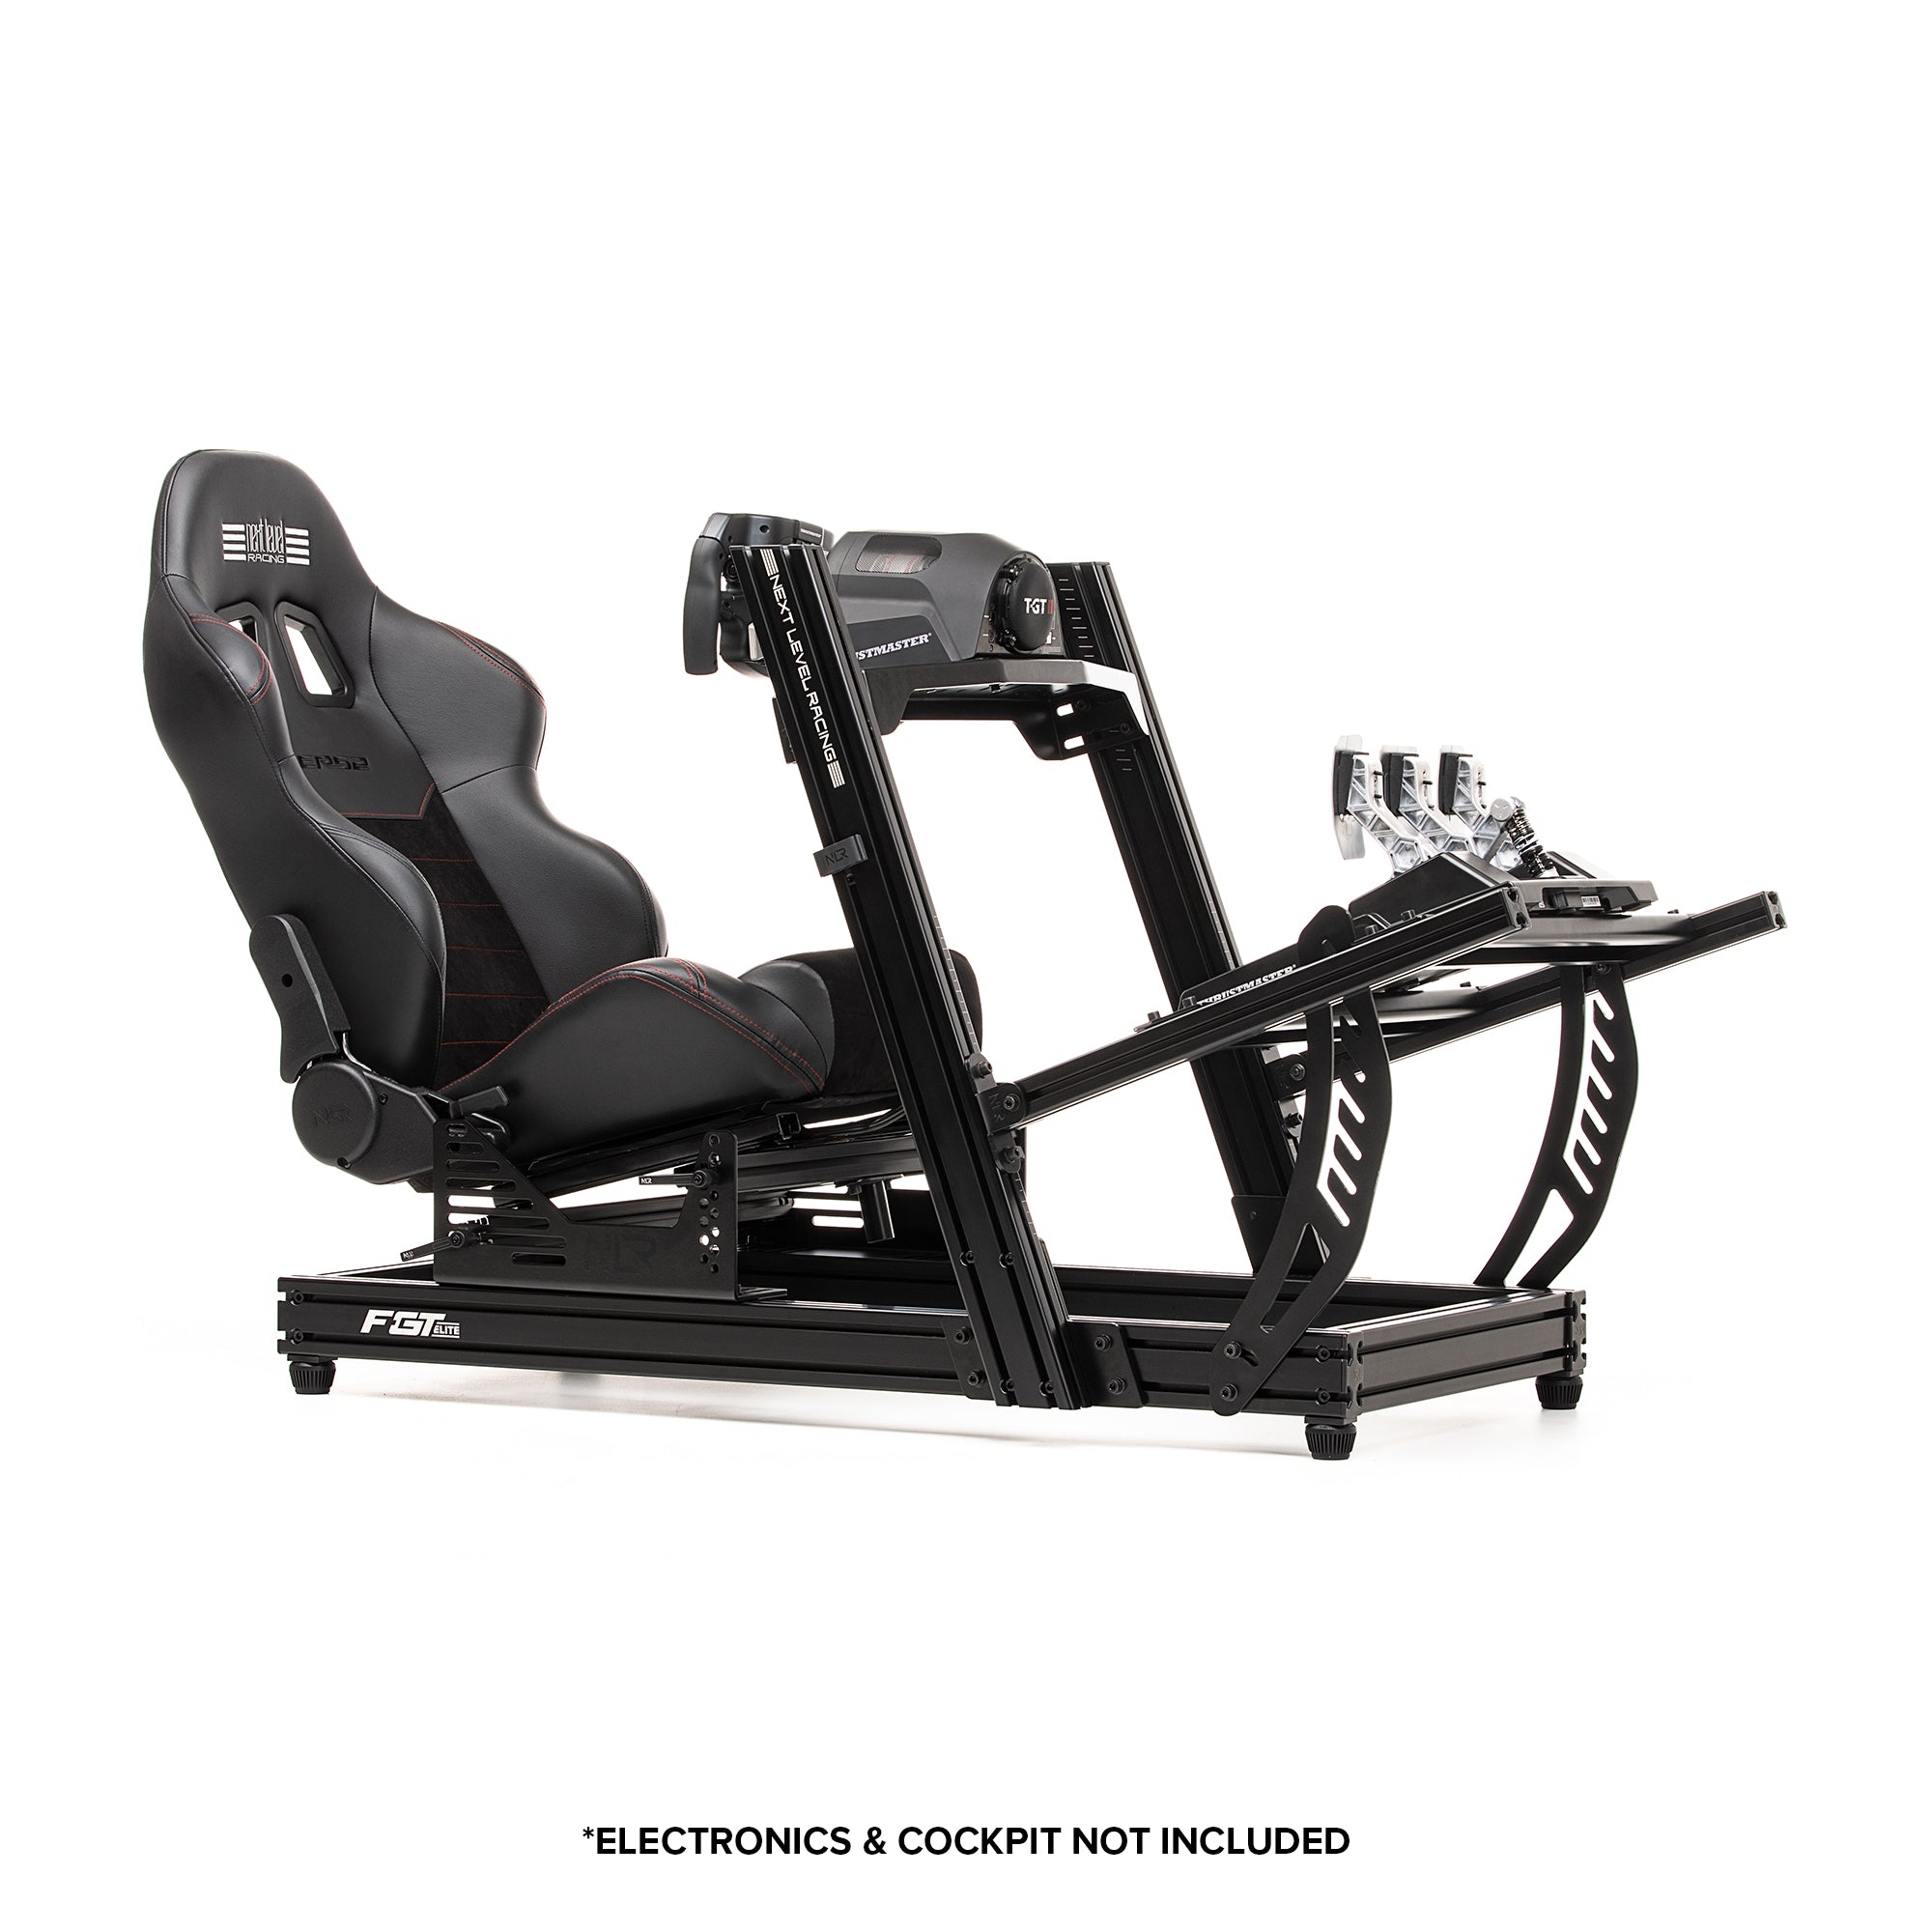 ASIENTO RECLINABLE NEXT LEVEL RACING® ERS2 